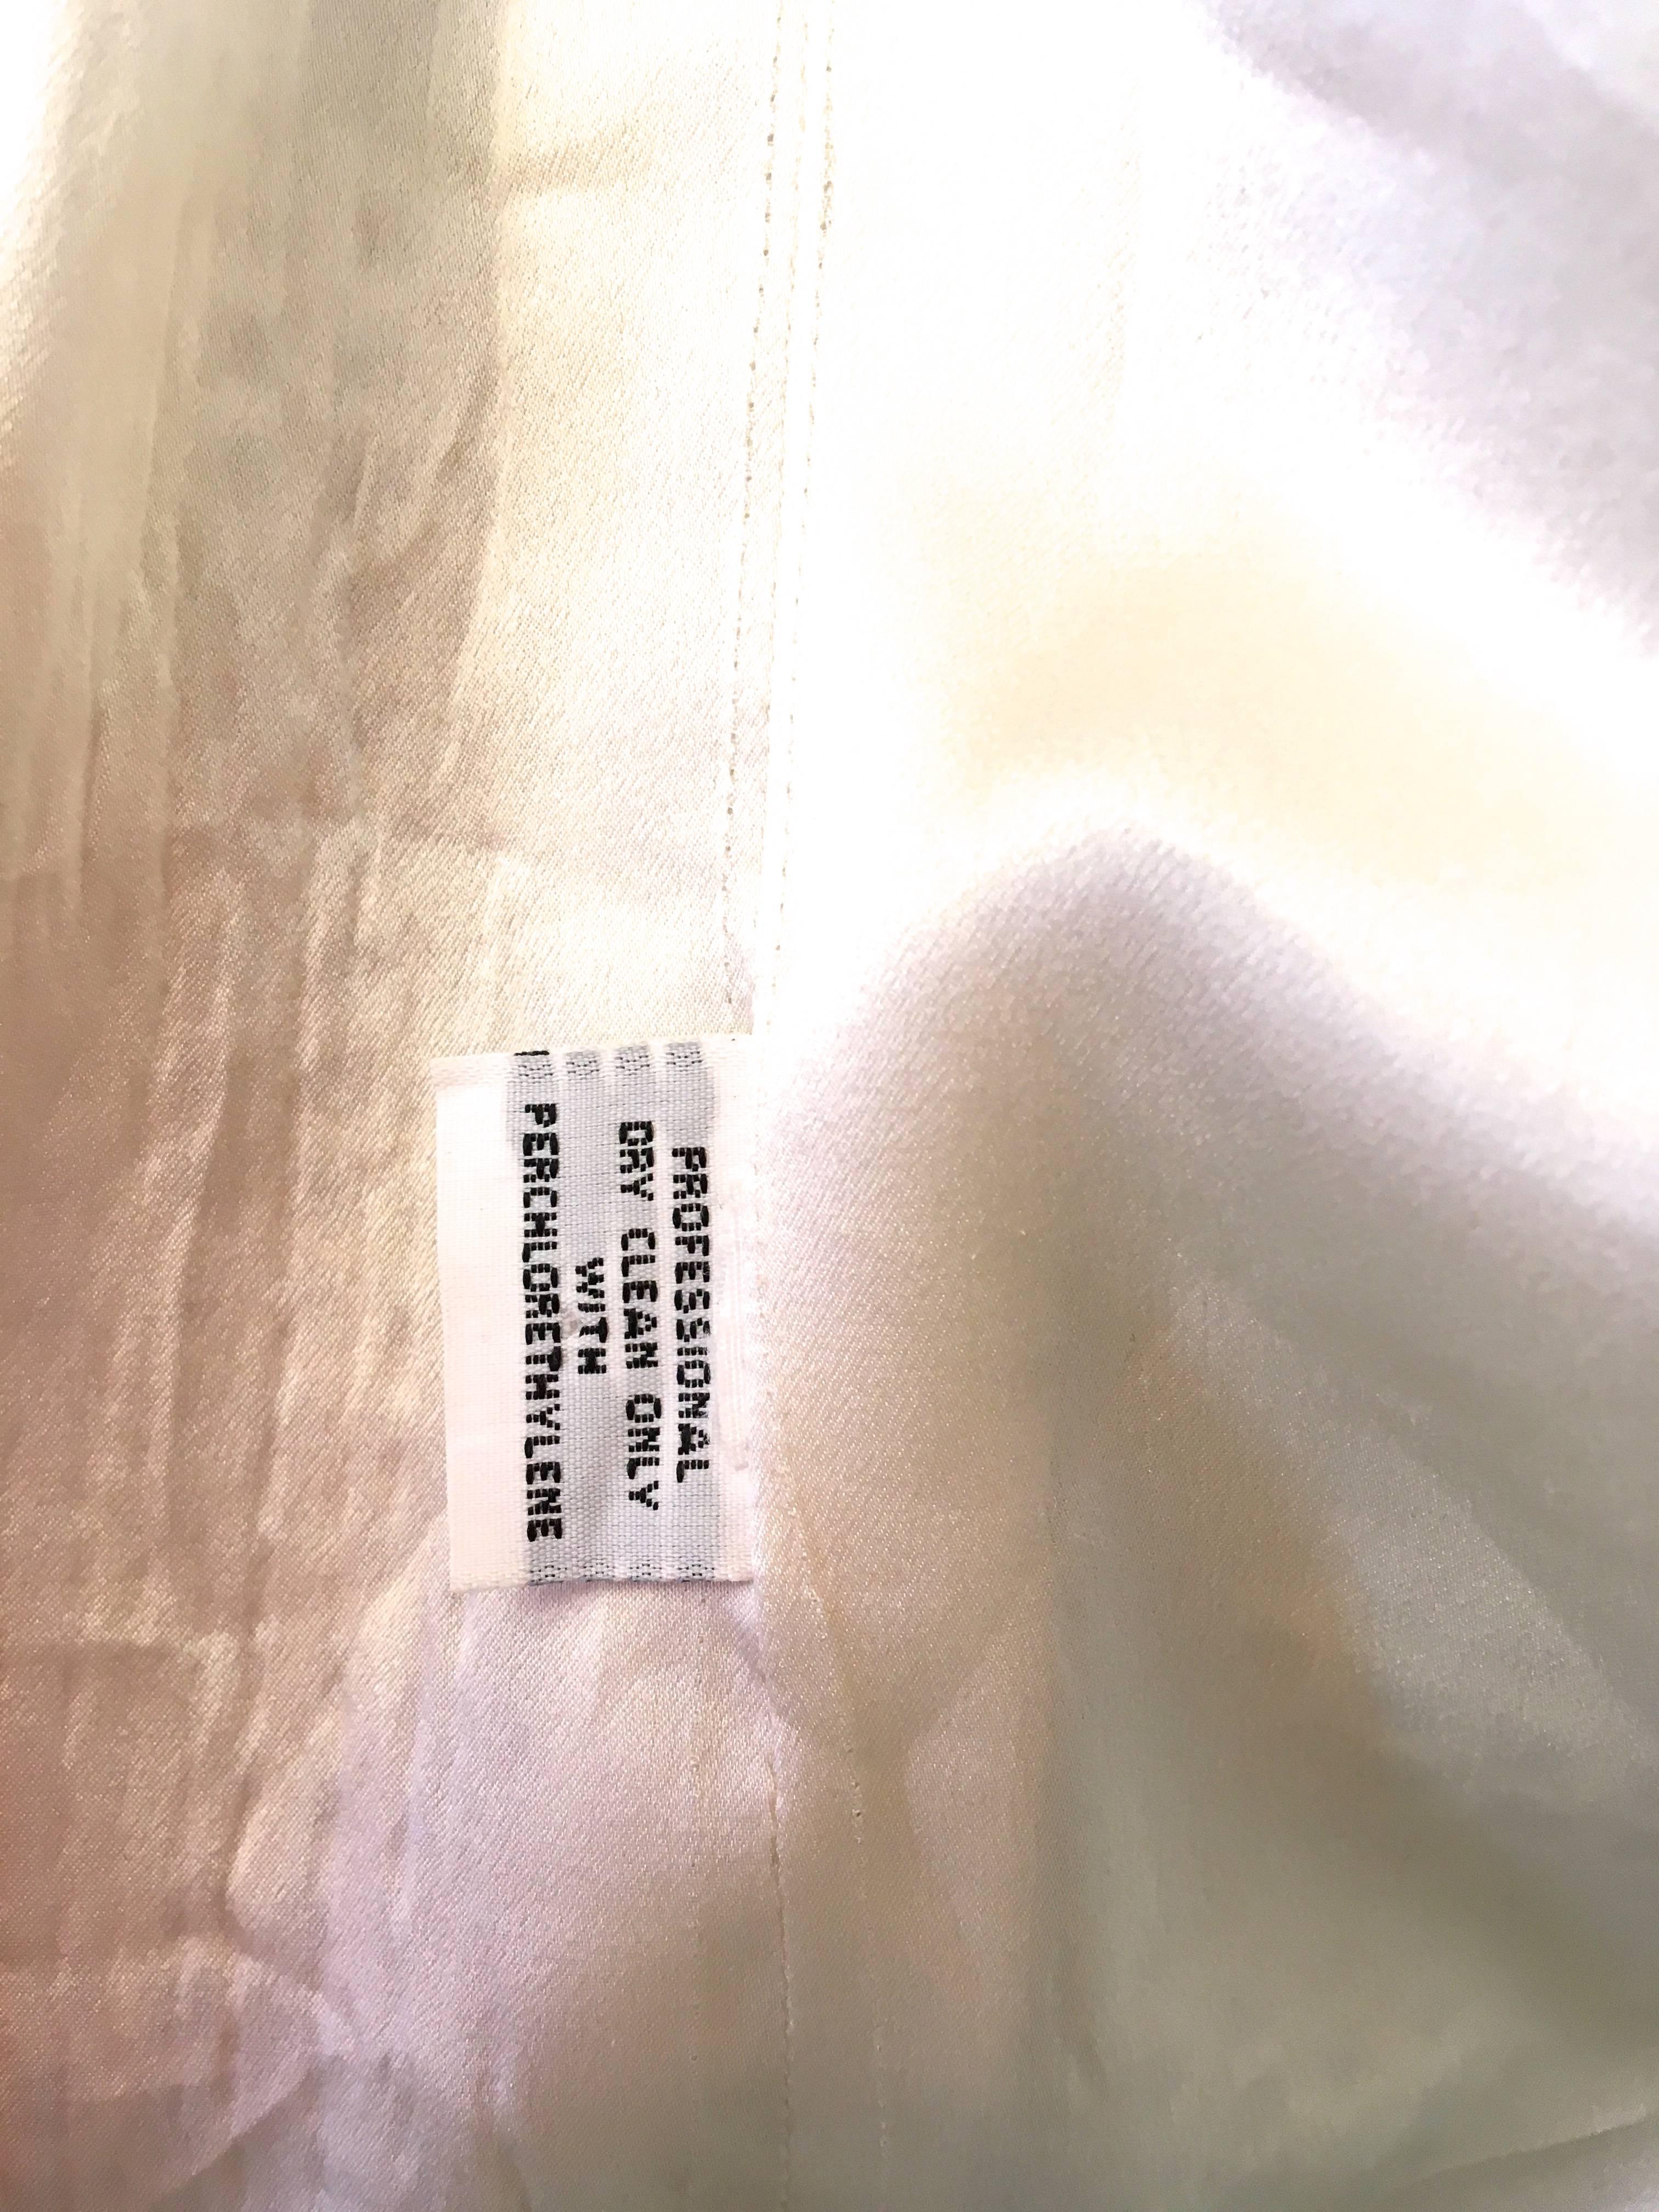 Bill Blass Coat - Beige and White - 1970's For Sale 4